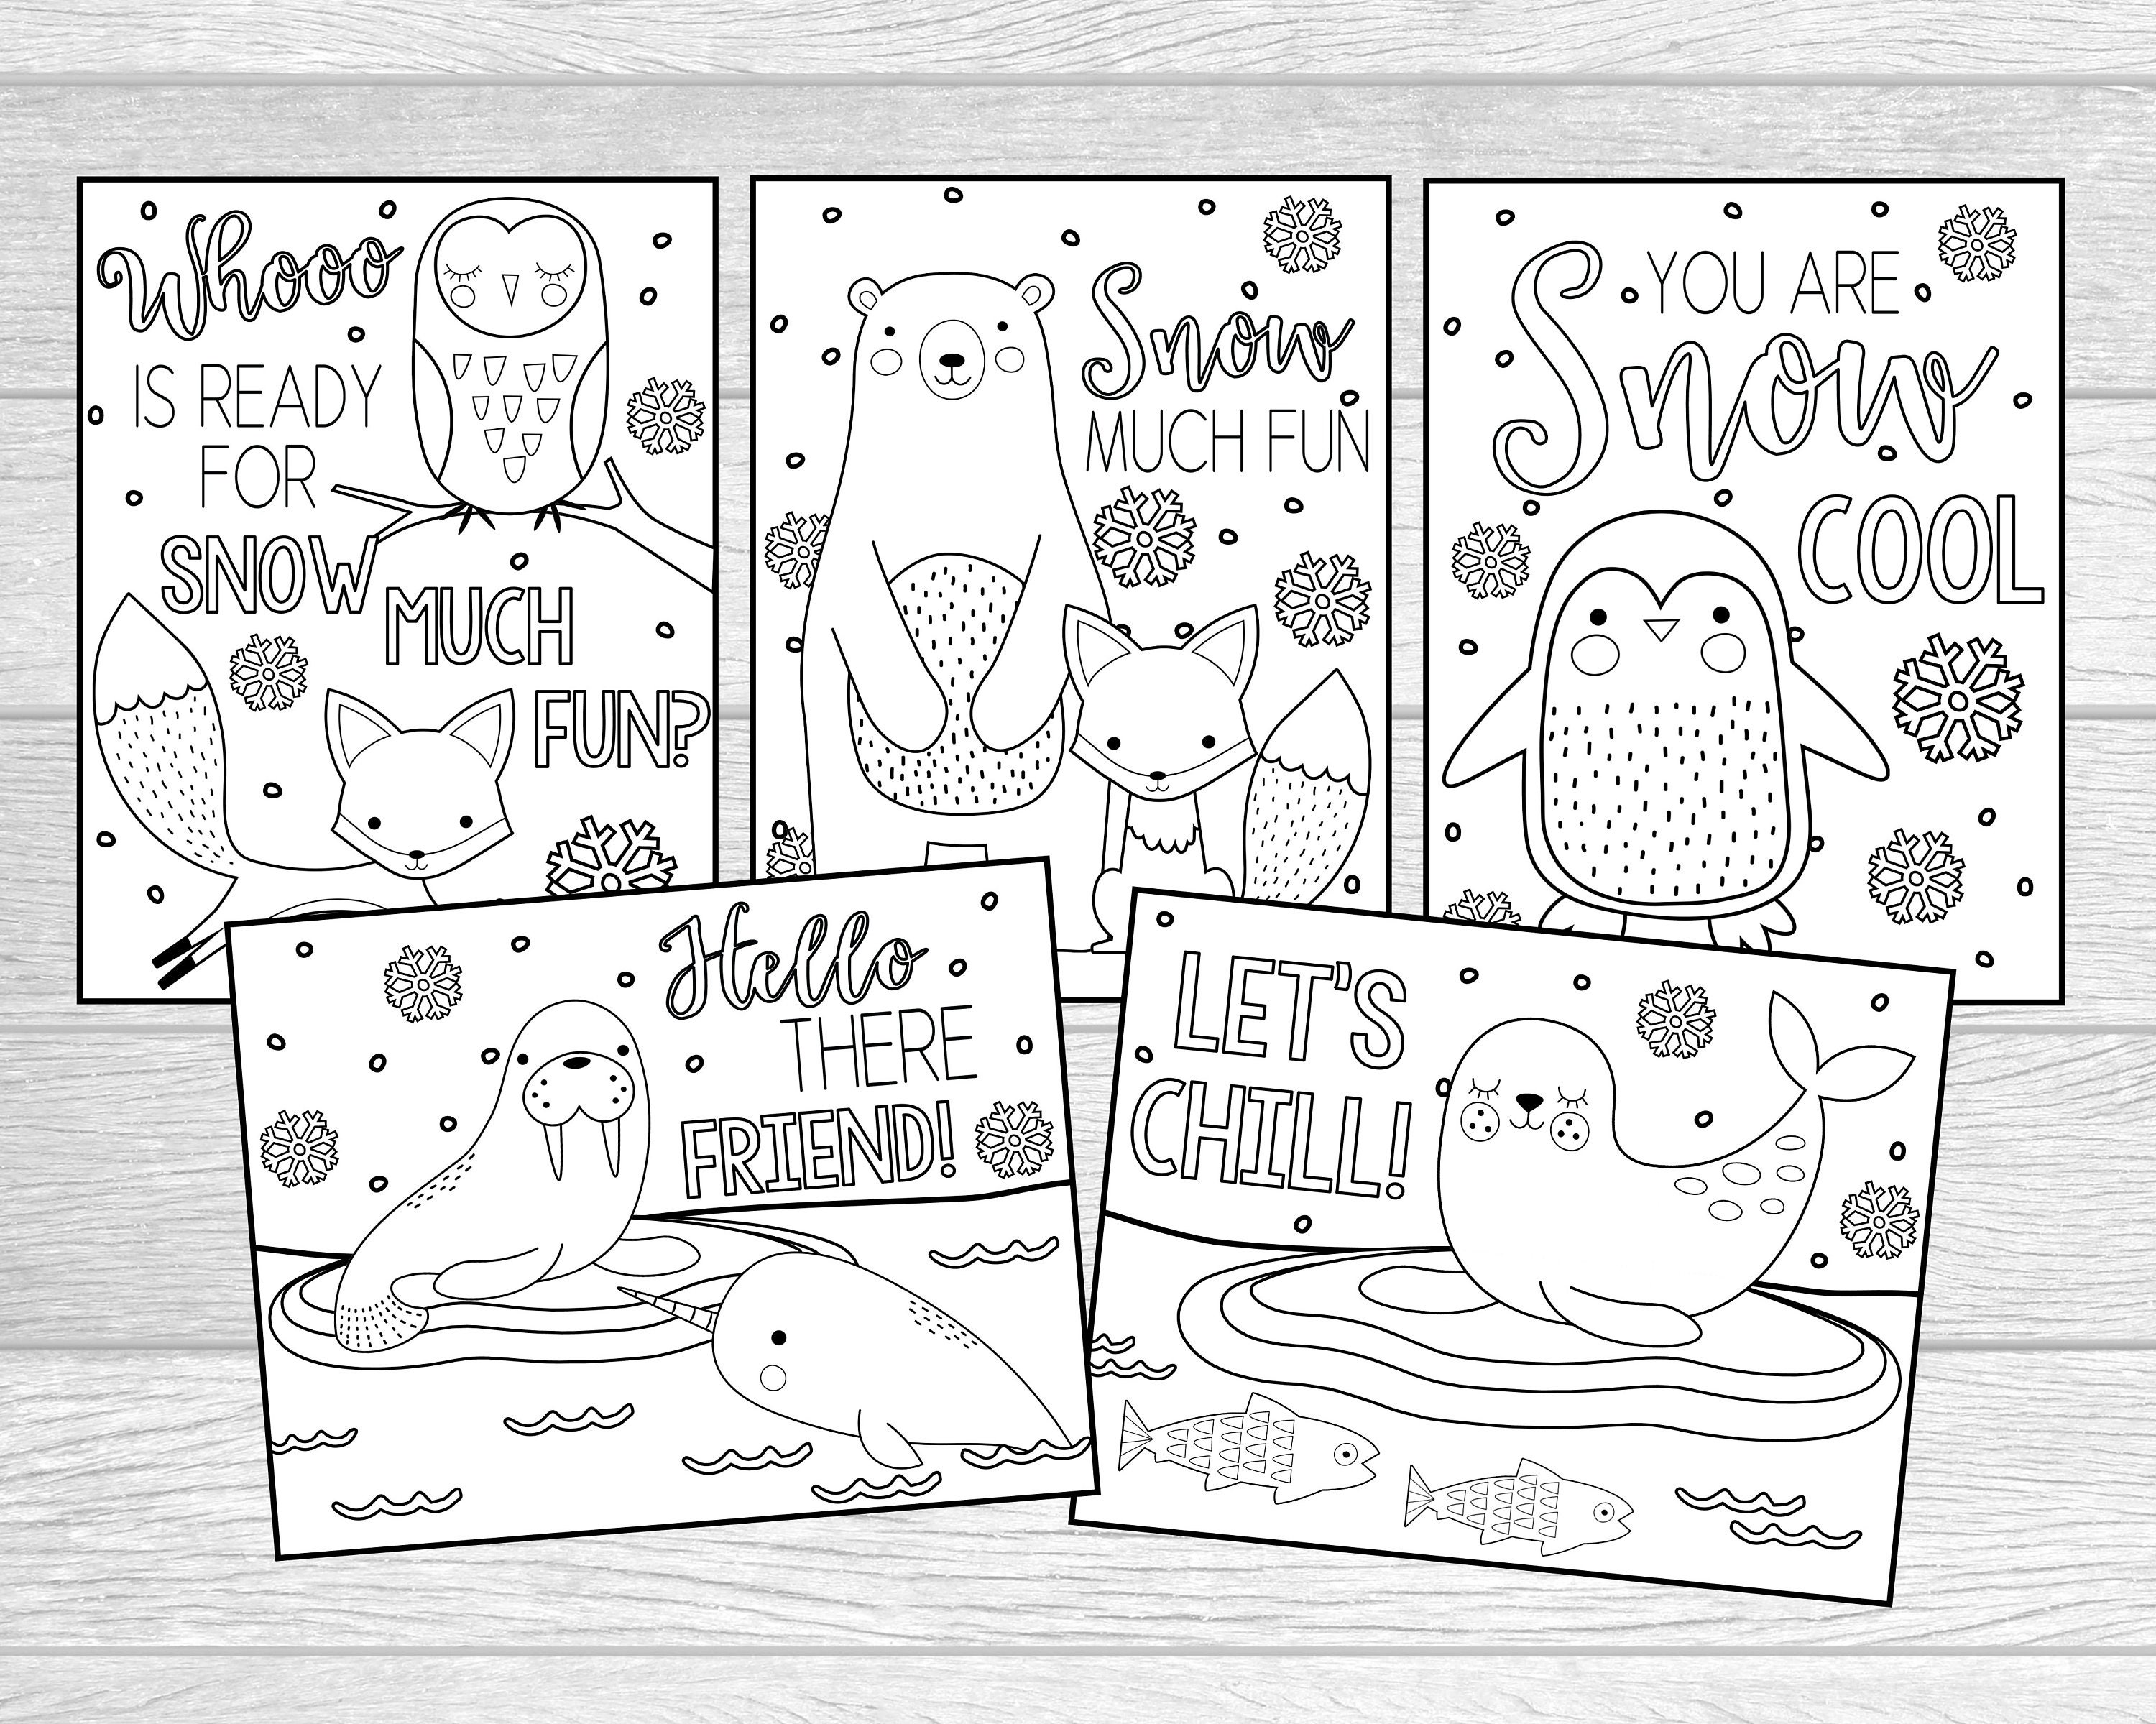 Printable winter animal coloring pages for kids or adults snow much fun arctic animal coloring pages instant digital download